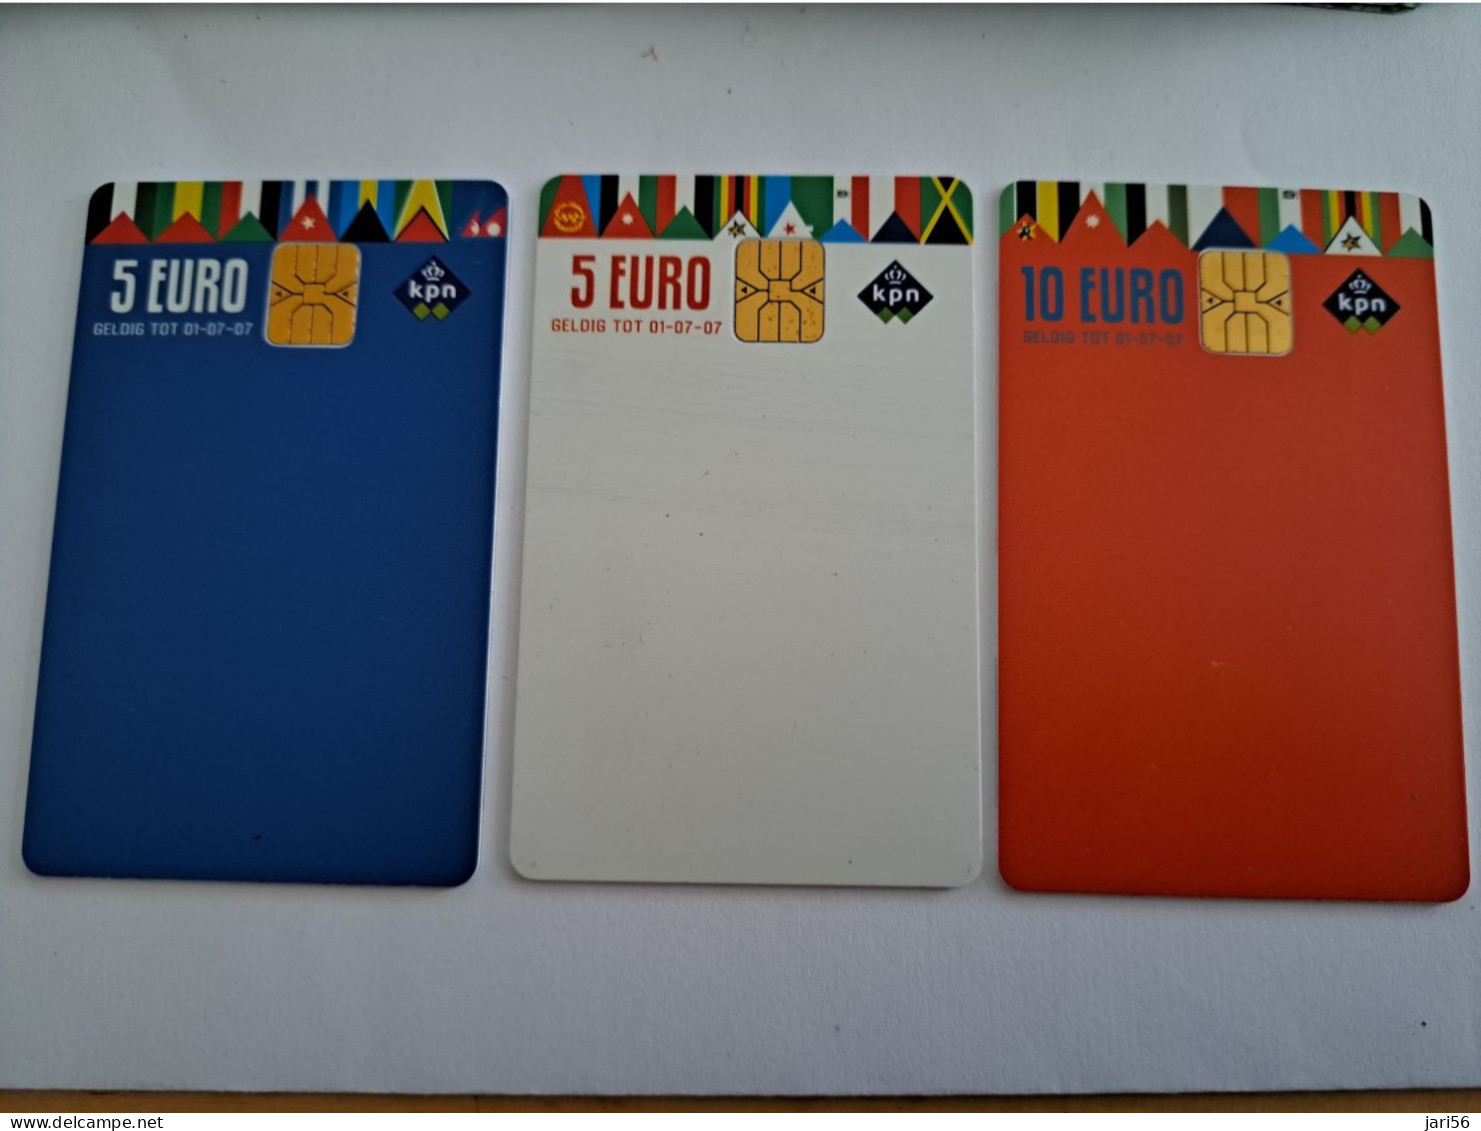 NETHERLANDS CHIPCARD  2X CARD  5 EURO / 1X 10 EURO /  FLAGS OF MANY COUNTRYS     /  USED   Cards  ** 15735 ** - öffentlich